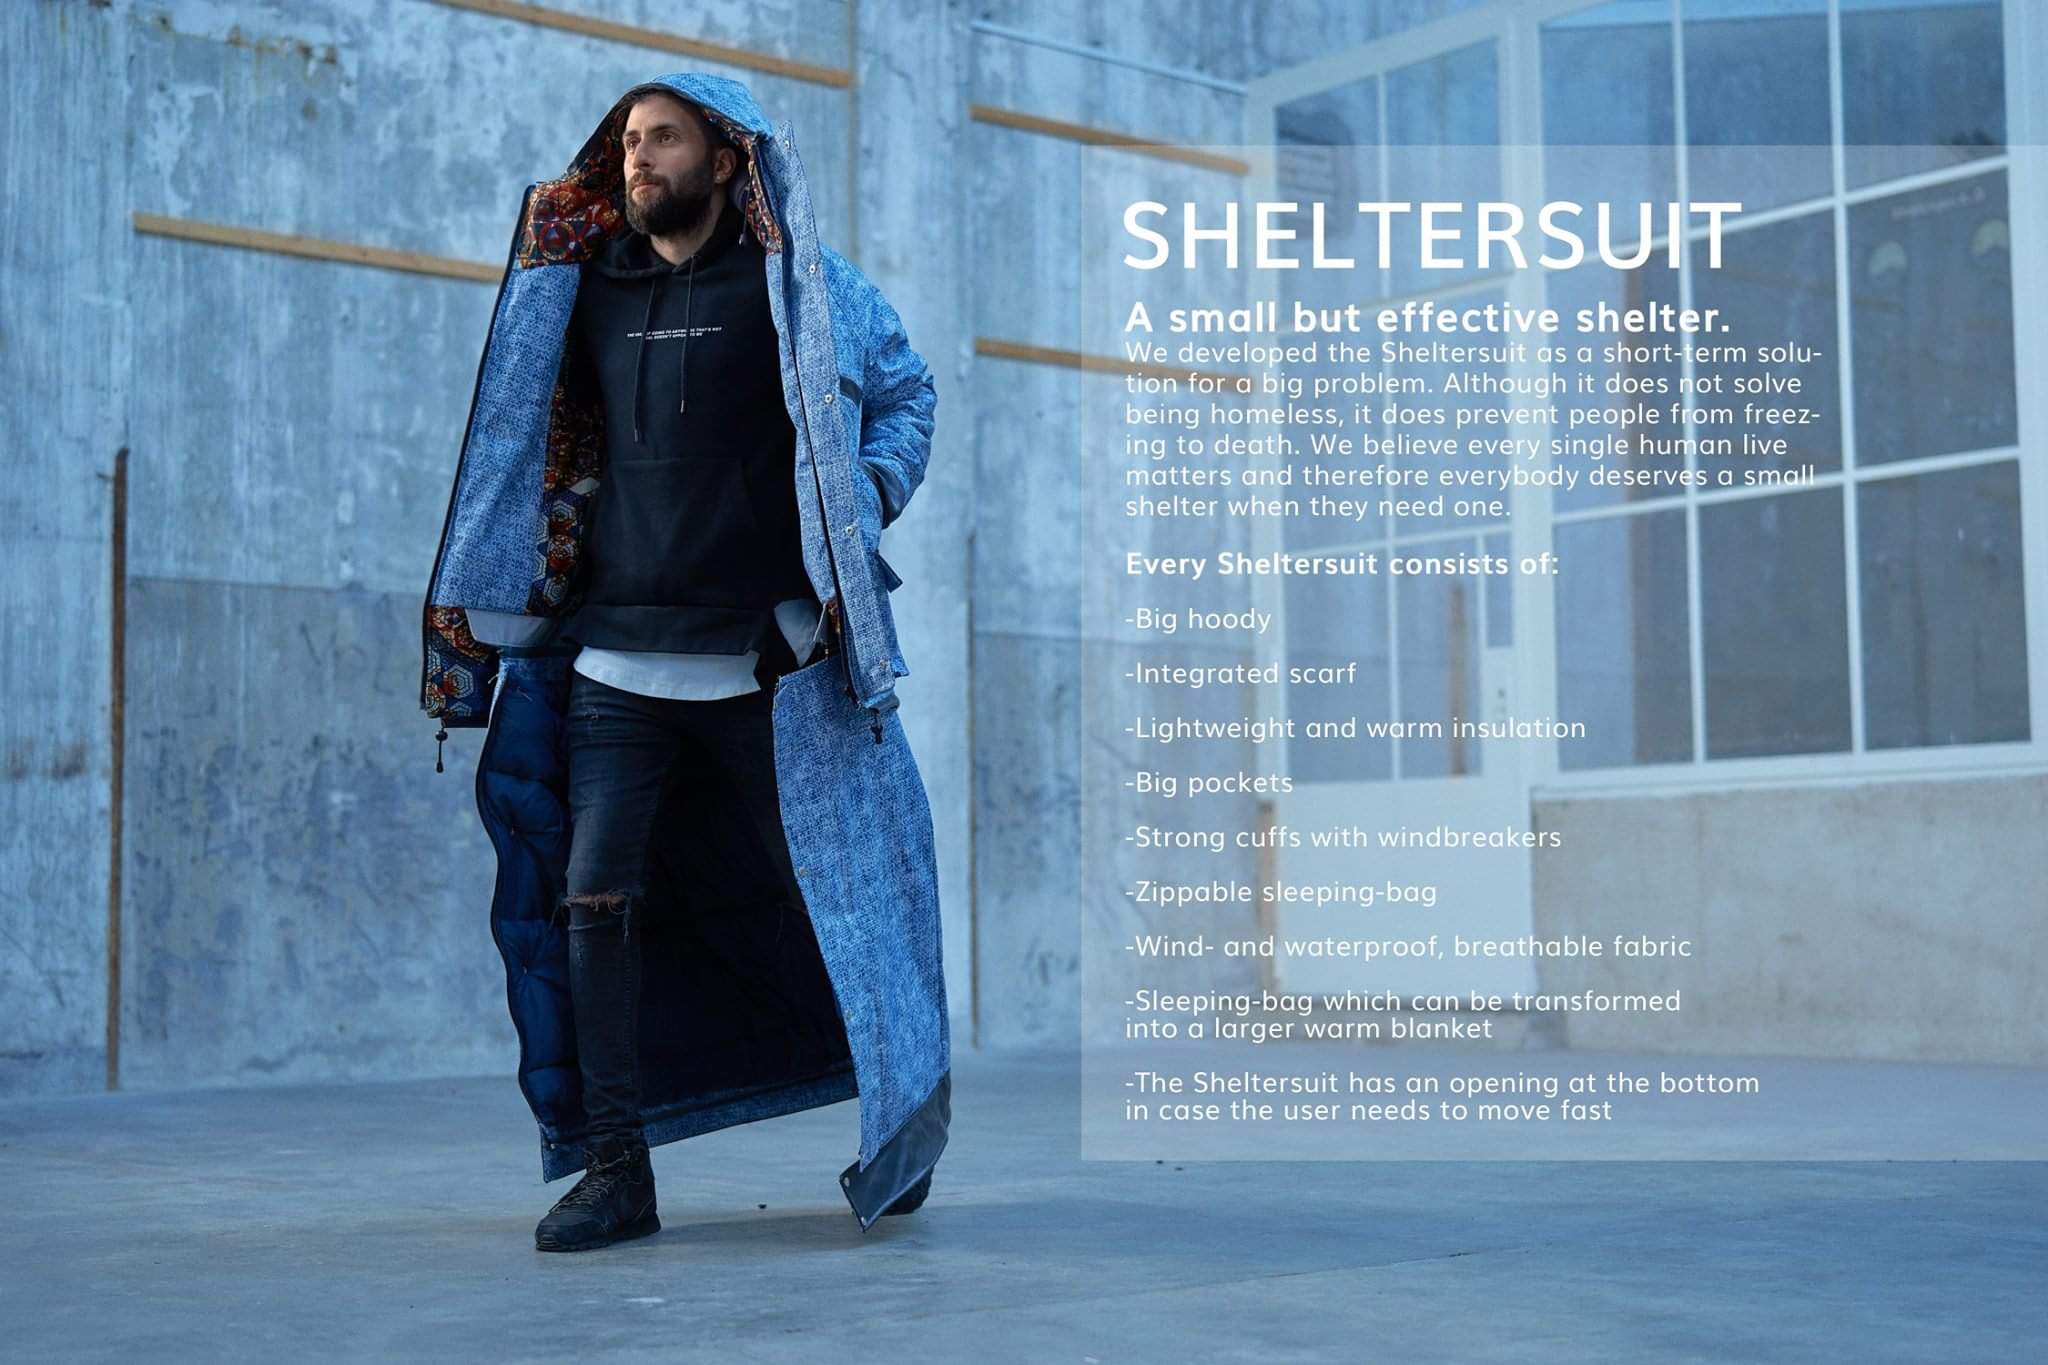 The German Design Council officially selected Sheltersuit as a winner of the German Design Award 2018. The Sheltersuit is a high quality water-and windproof jacket, combined with an attachable zip-on sleeping bag, that provides protection and warmth in any type of weather.